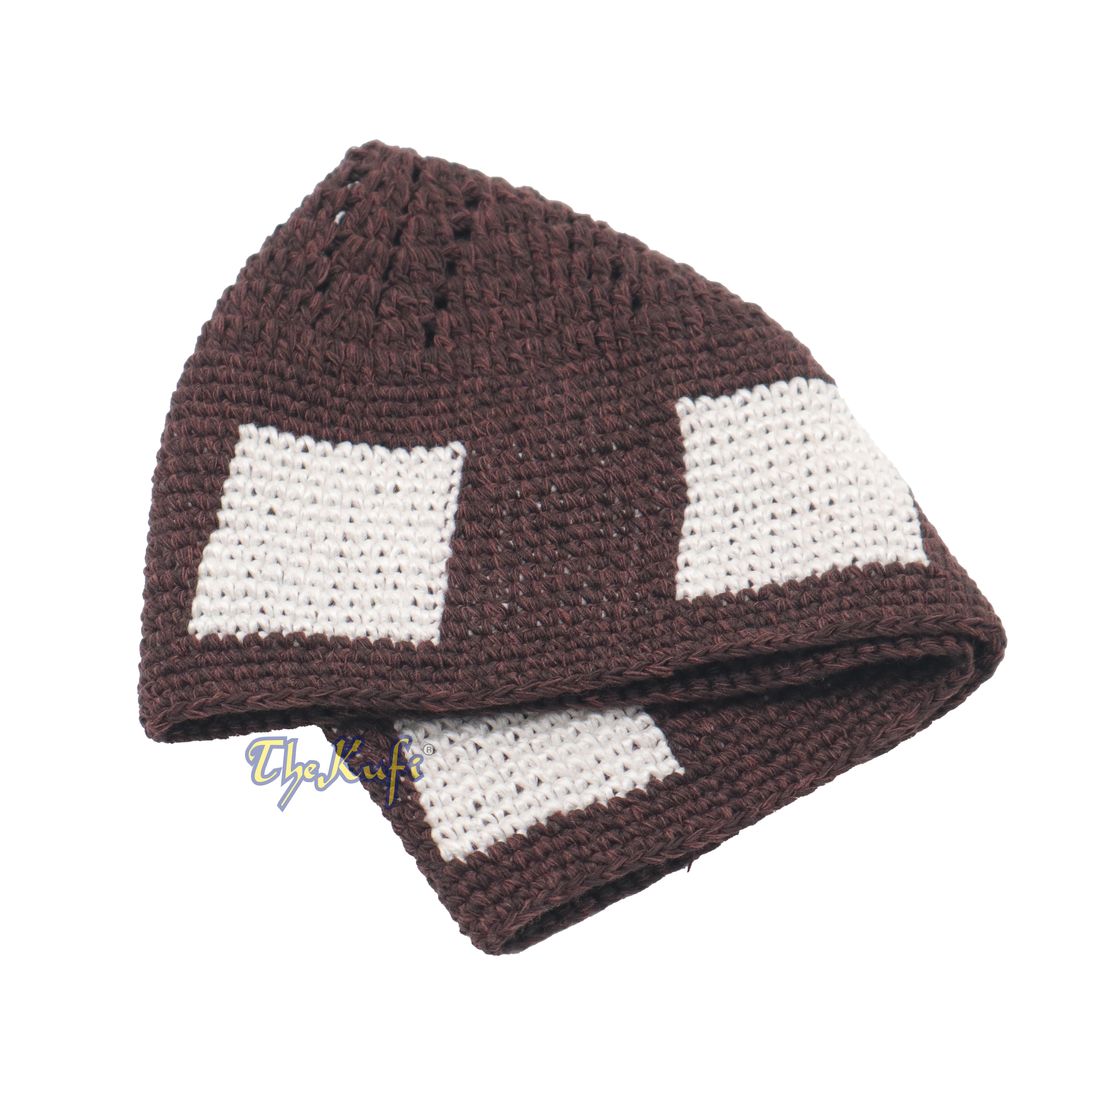 Hand-crocheted Dark Brown Kufi With White Squares For Kids